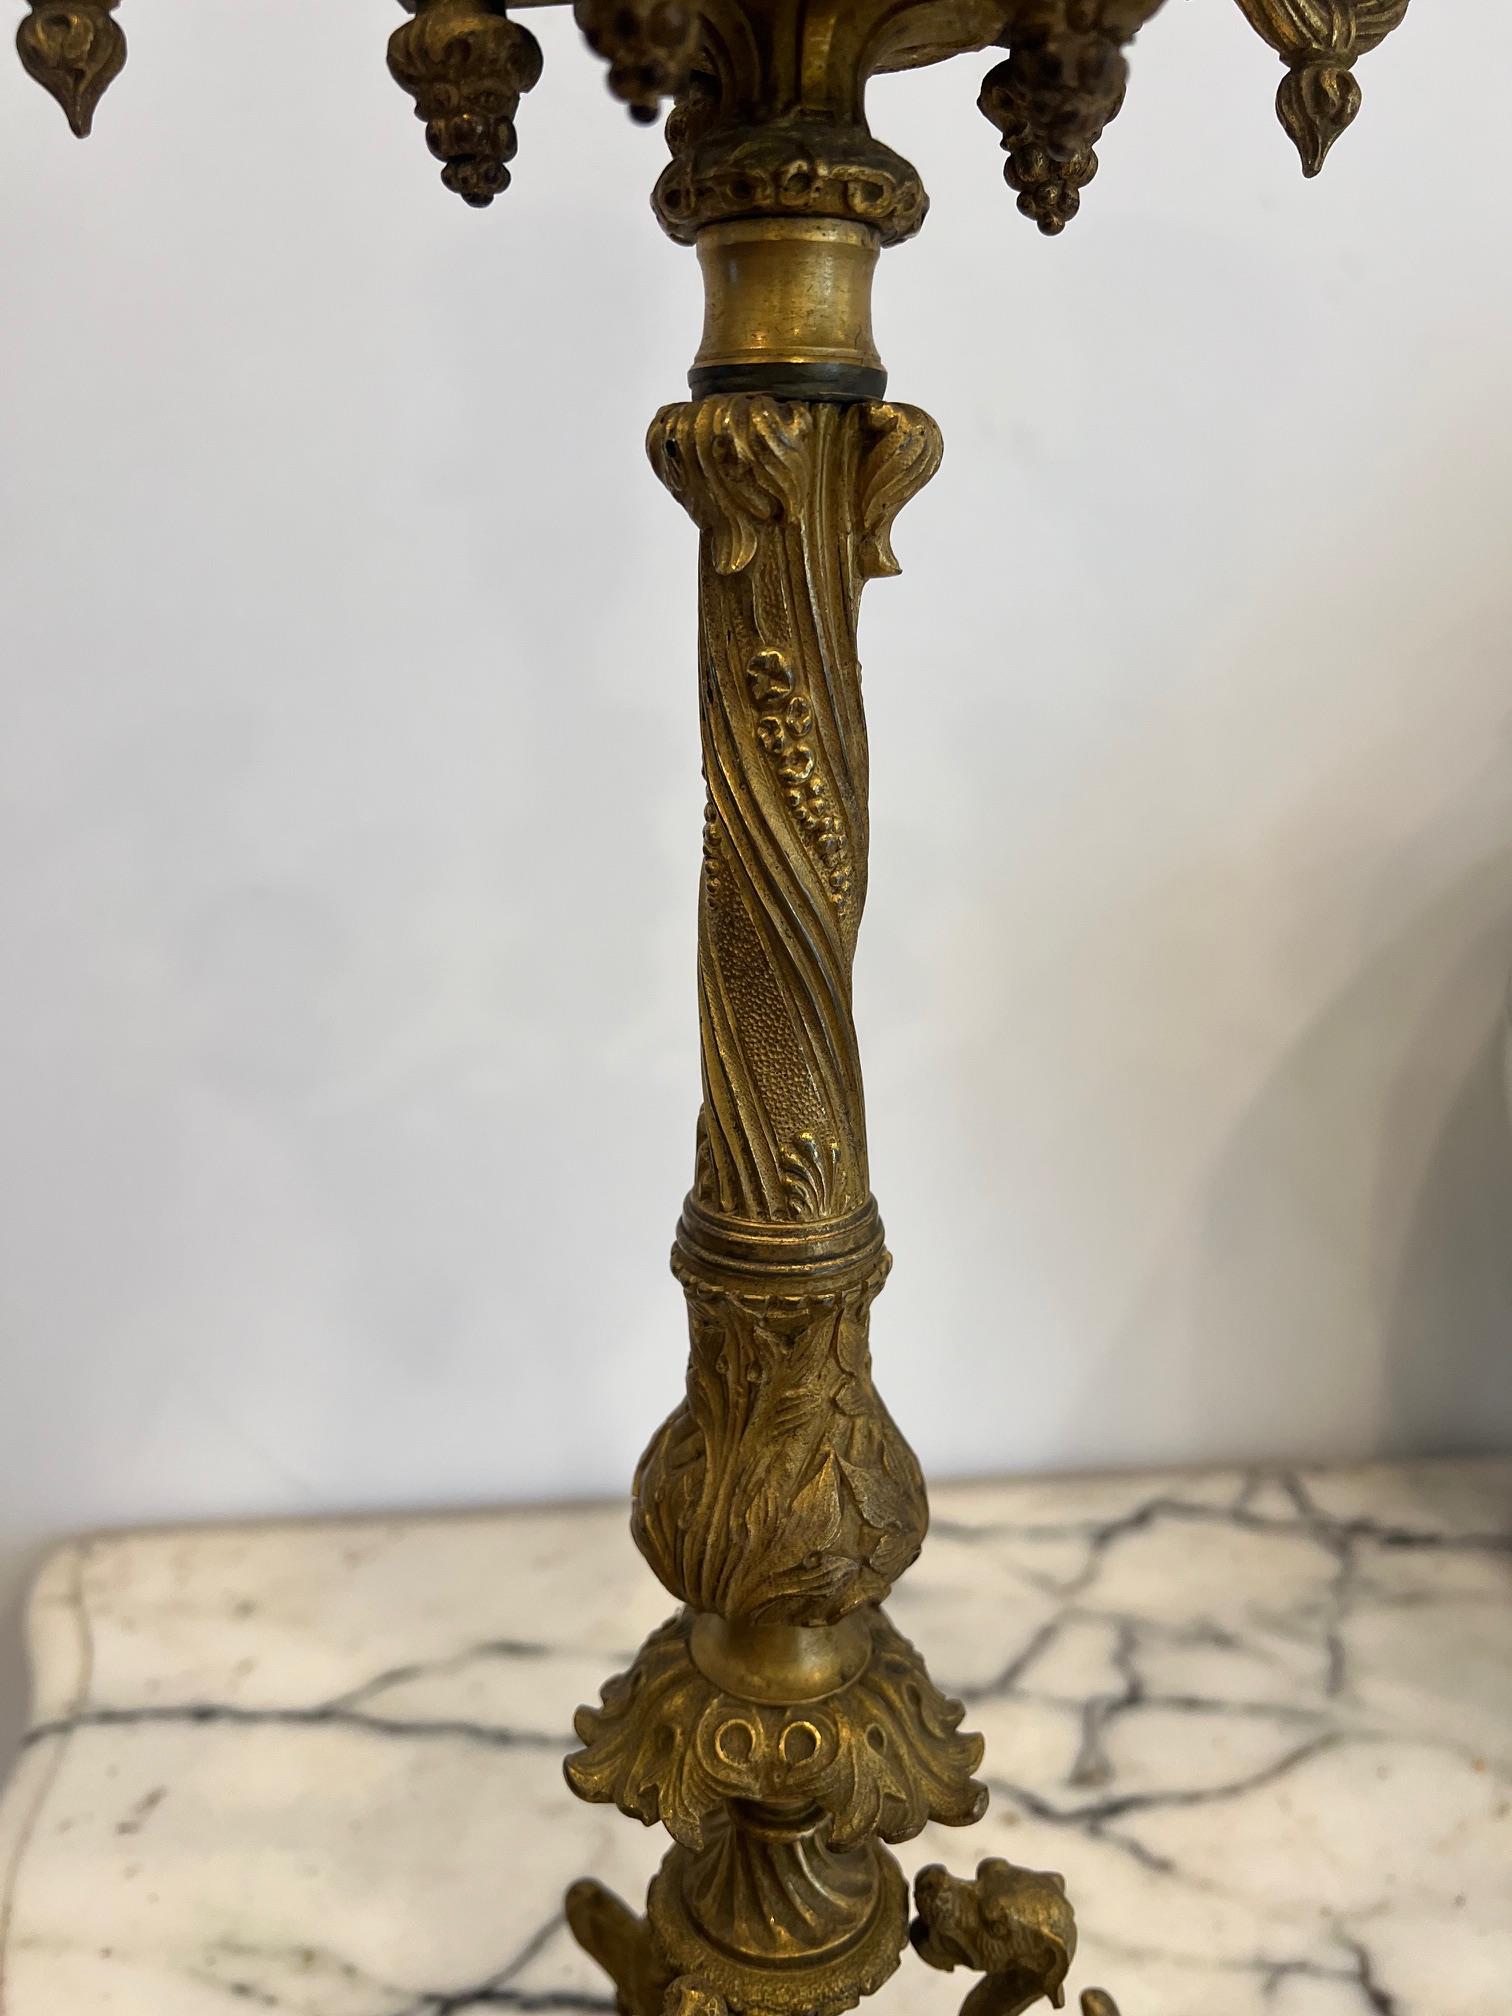 A LARGE PAIR OF 19TH CENTURY FRENCH GILT BRONZE CANDELABRA LAMPS - Image 6 of 8